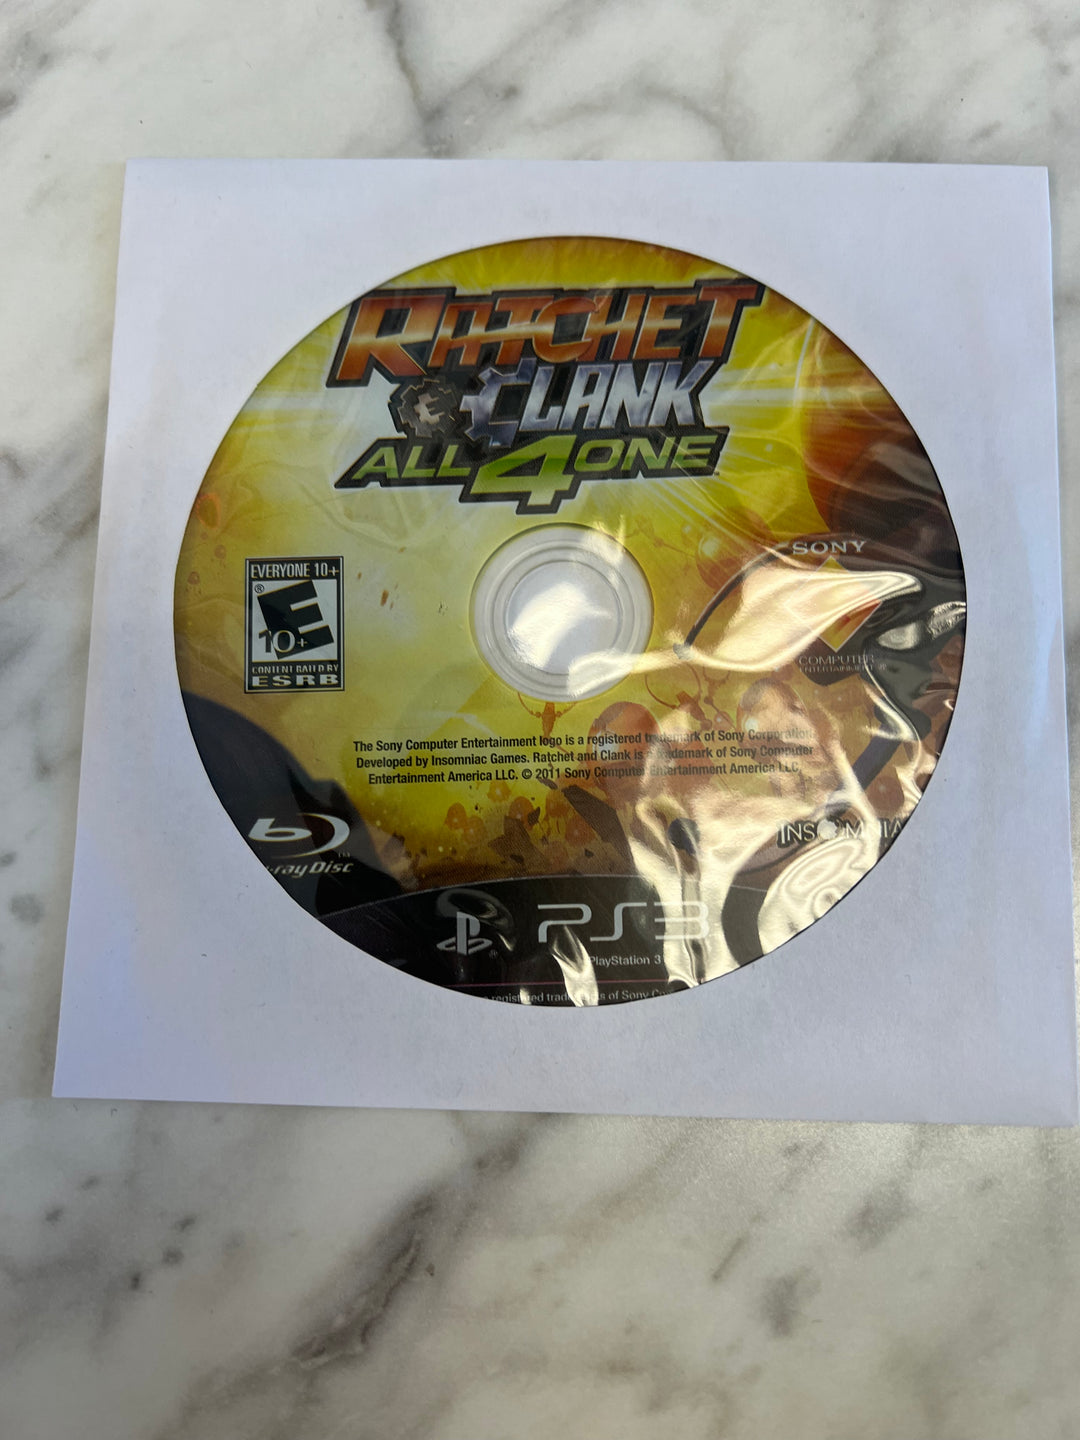 Ratchet & Clank All 4 One for PS3 Playstation 3 Disc Only No Case/Manual DU62724